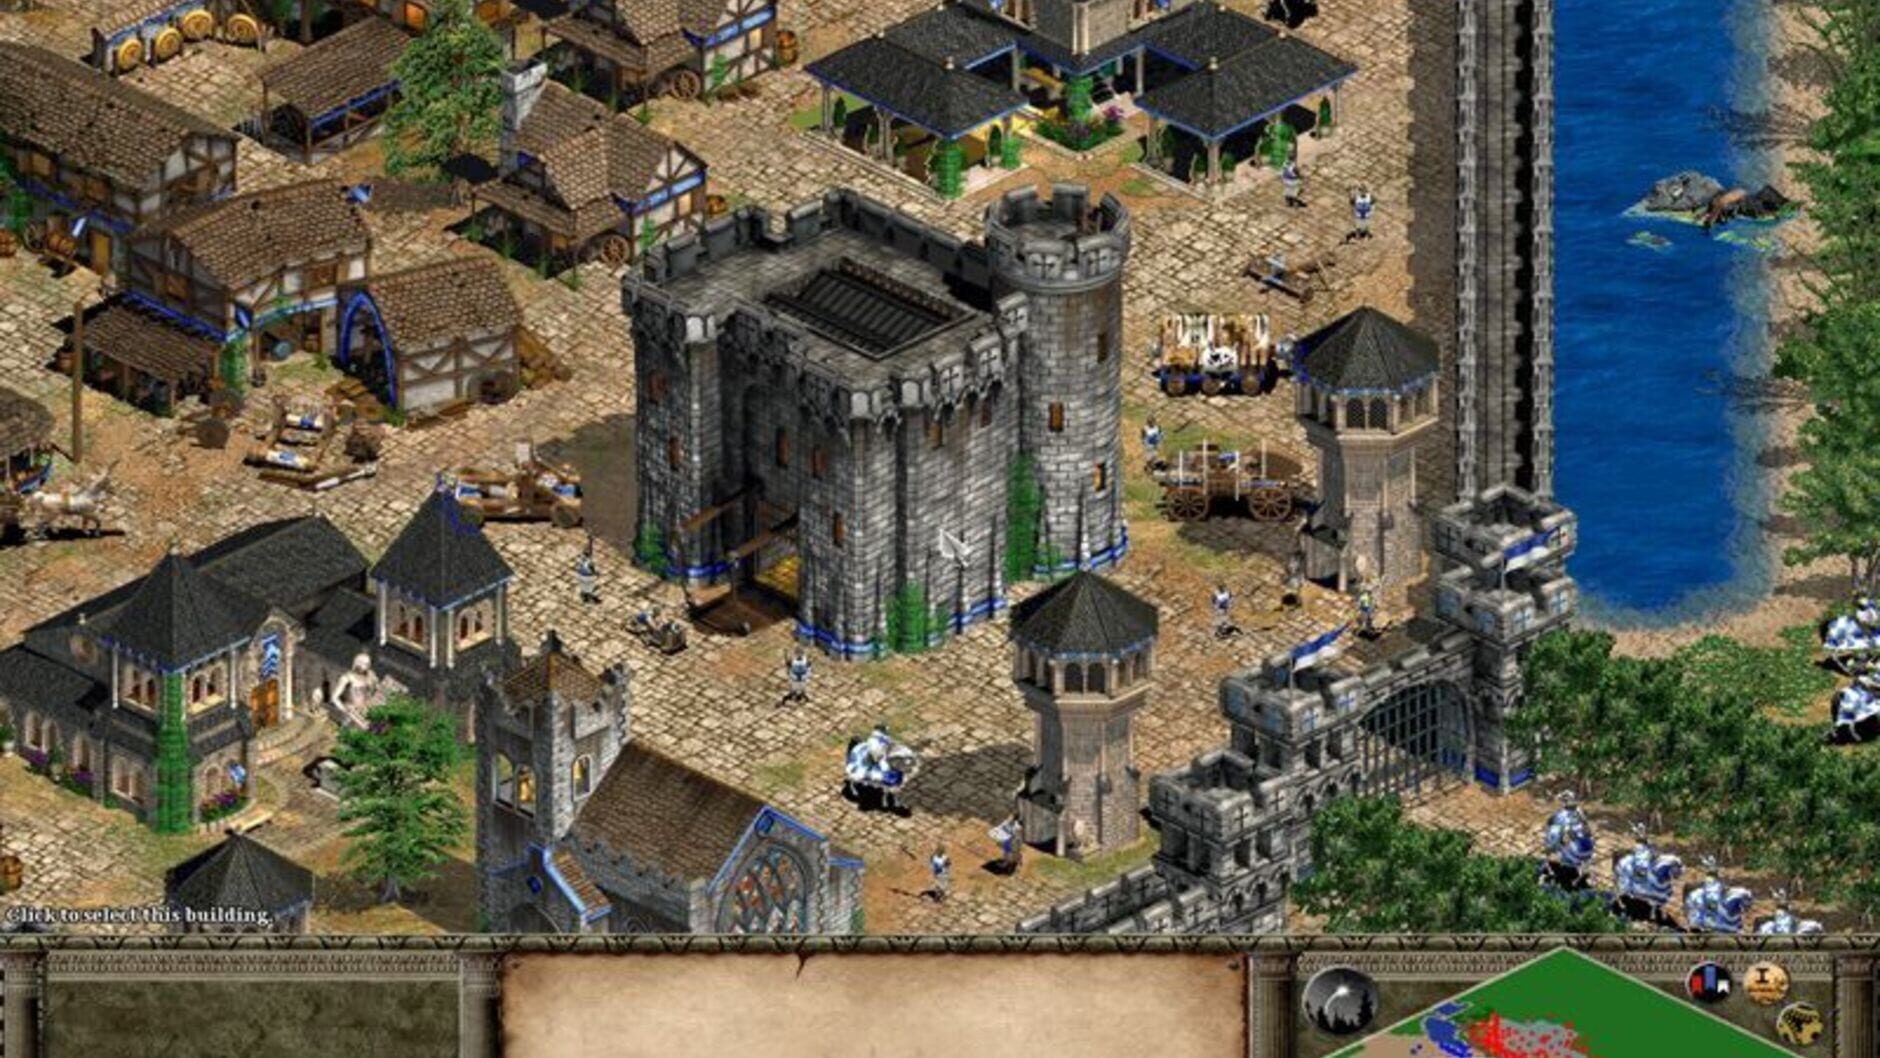 Screenshot for Age of Empires II: The Age of Kings